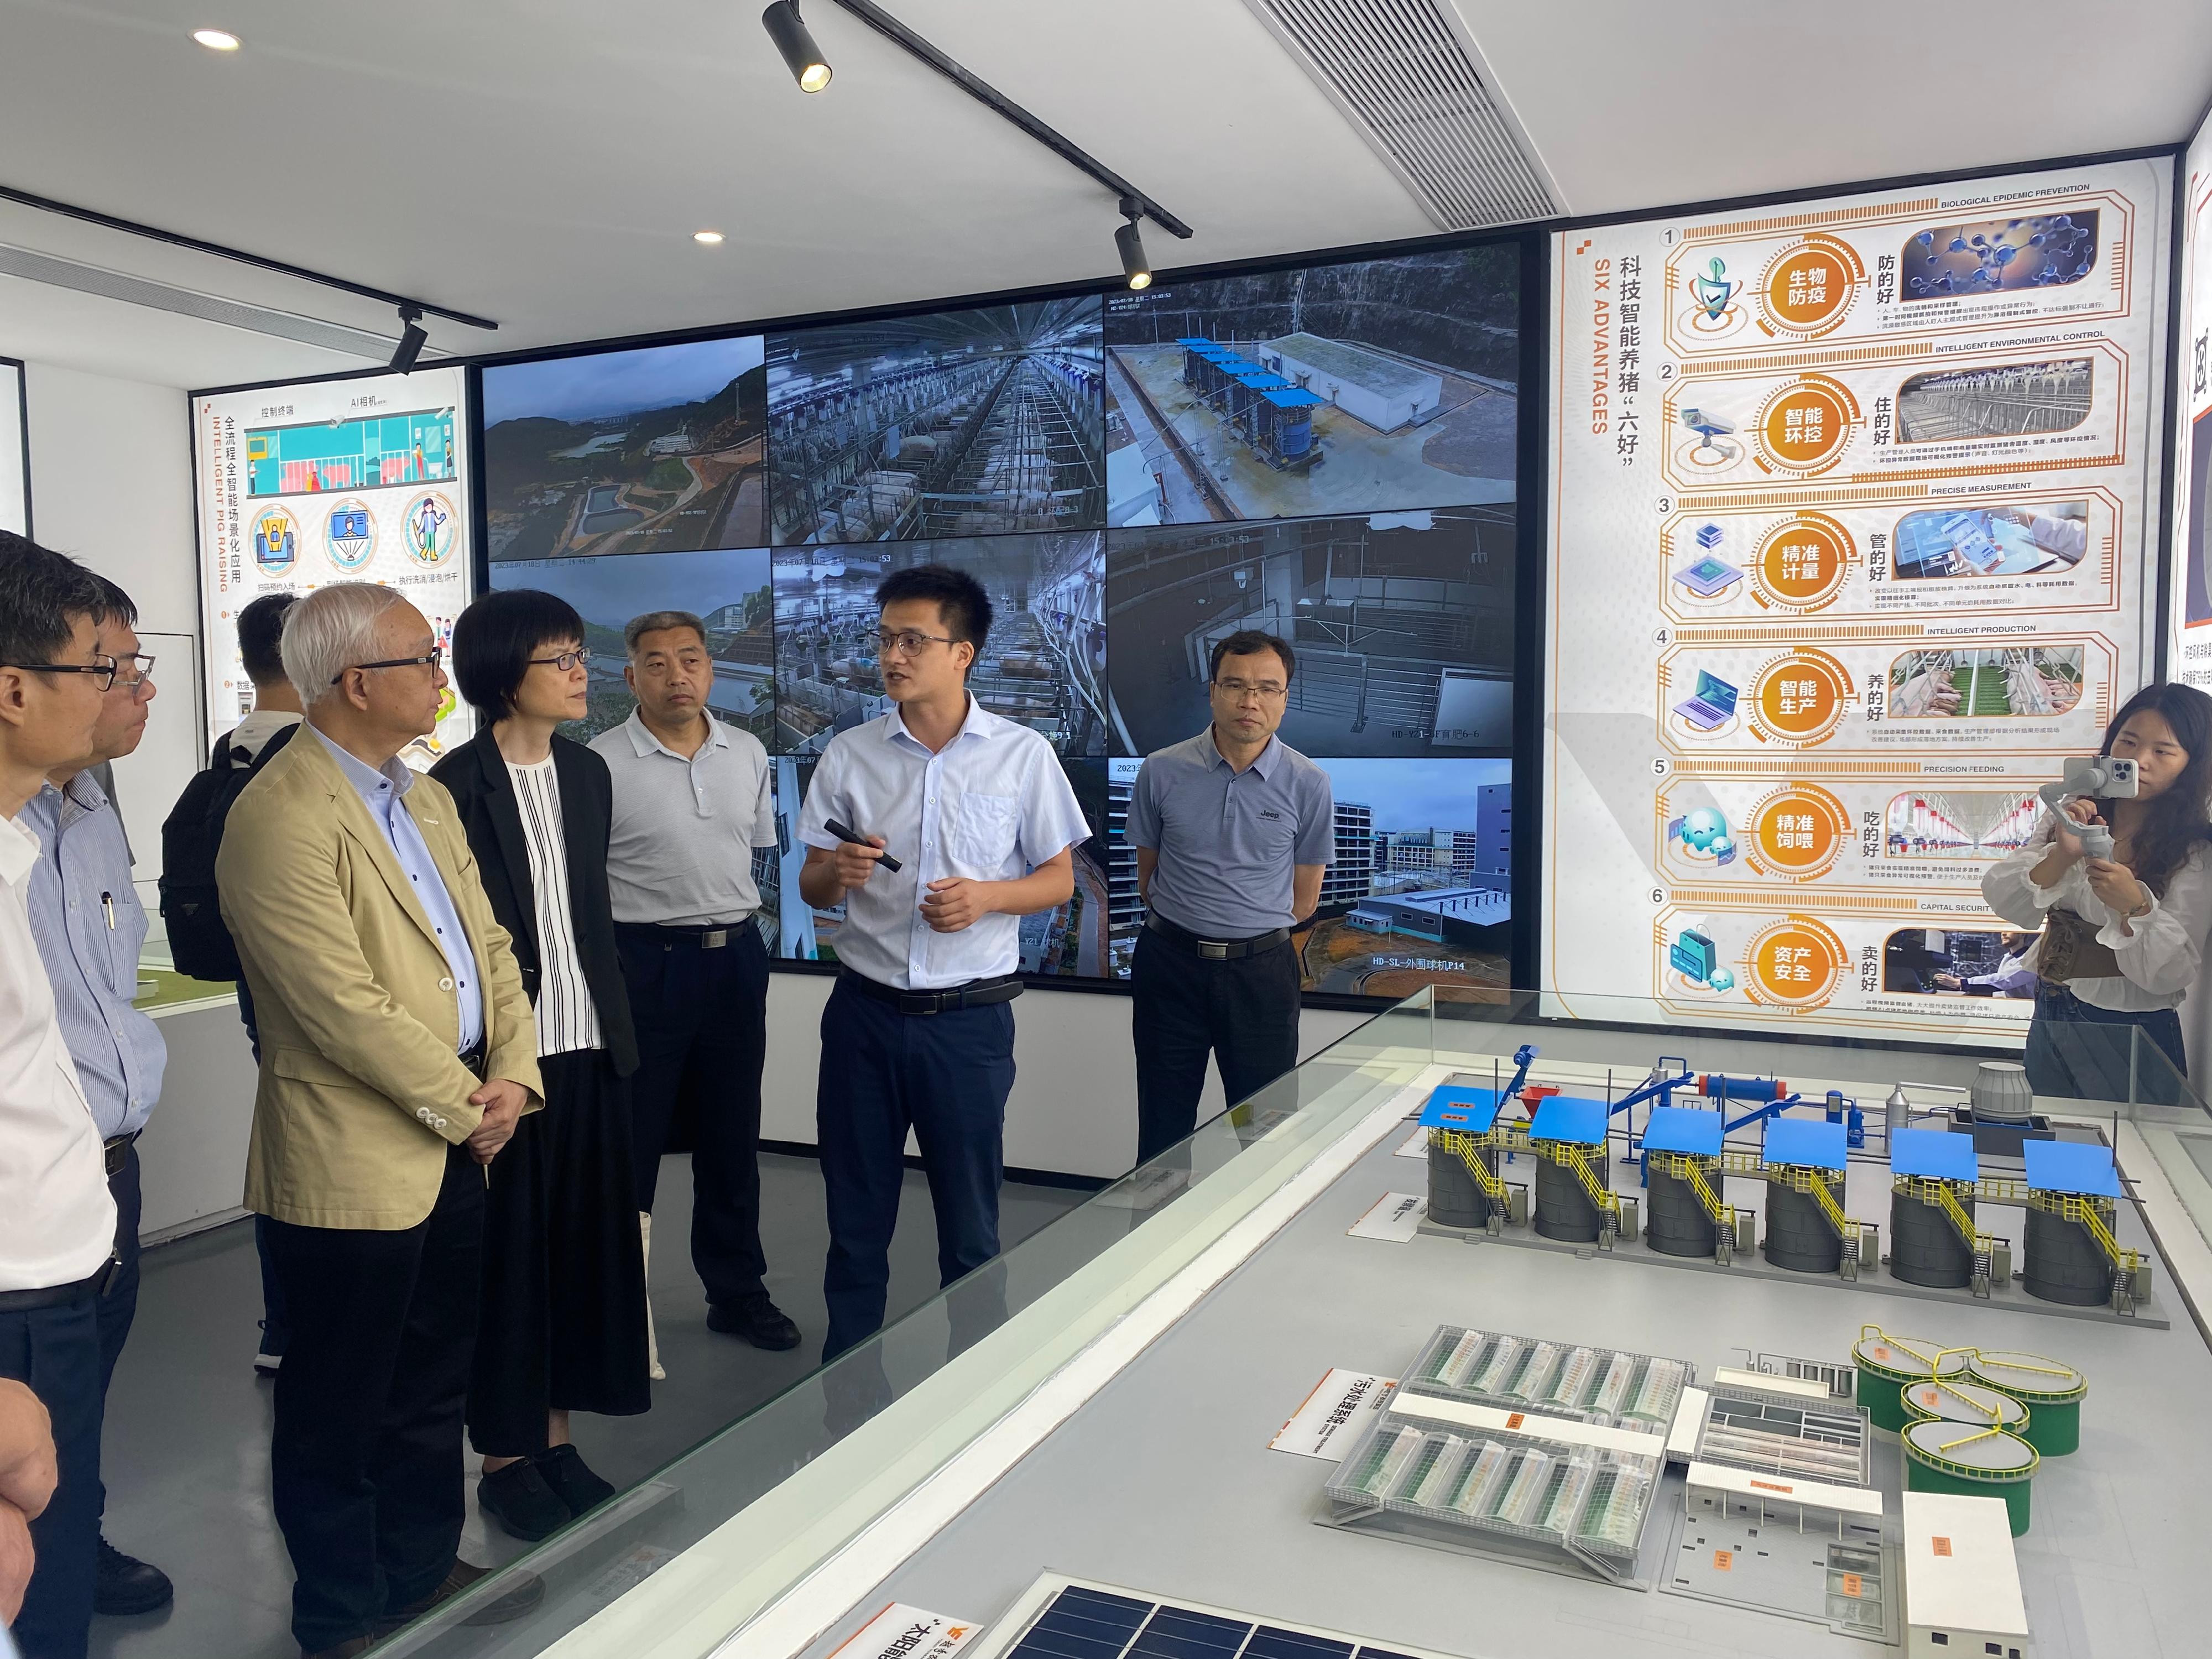 The Secretary for Environment and Ecology, Mr Tse Chin-wan, began his visit in Guangzhou and Zhaoqing today (July 18) and visited a high-rise pig farm in Huadu District in Guangzhou in the afternoon. Photo shows Mr Tse (third left); the Permanent Secretary for Environment and Ecology (Food), Miss Vivian Lau (fourth left); and the Director of Agriculture, Fisheries and Conservation, Dr Leung Siu-fai (second left), receiving a briefing from a representative of the farm on technologies and operation of the multi-storey livestock farm facilities. 

